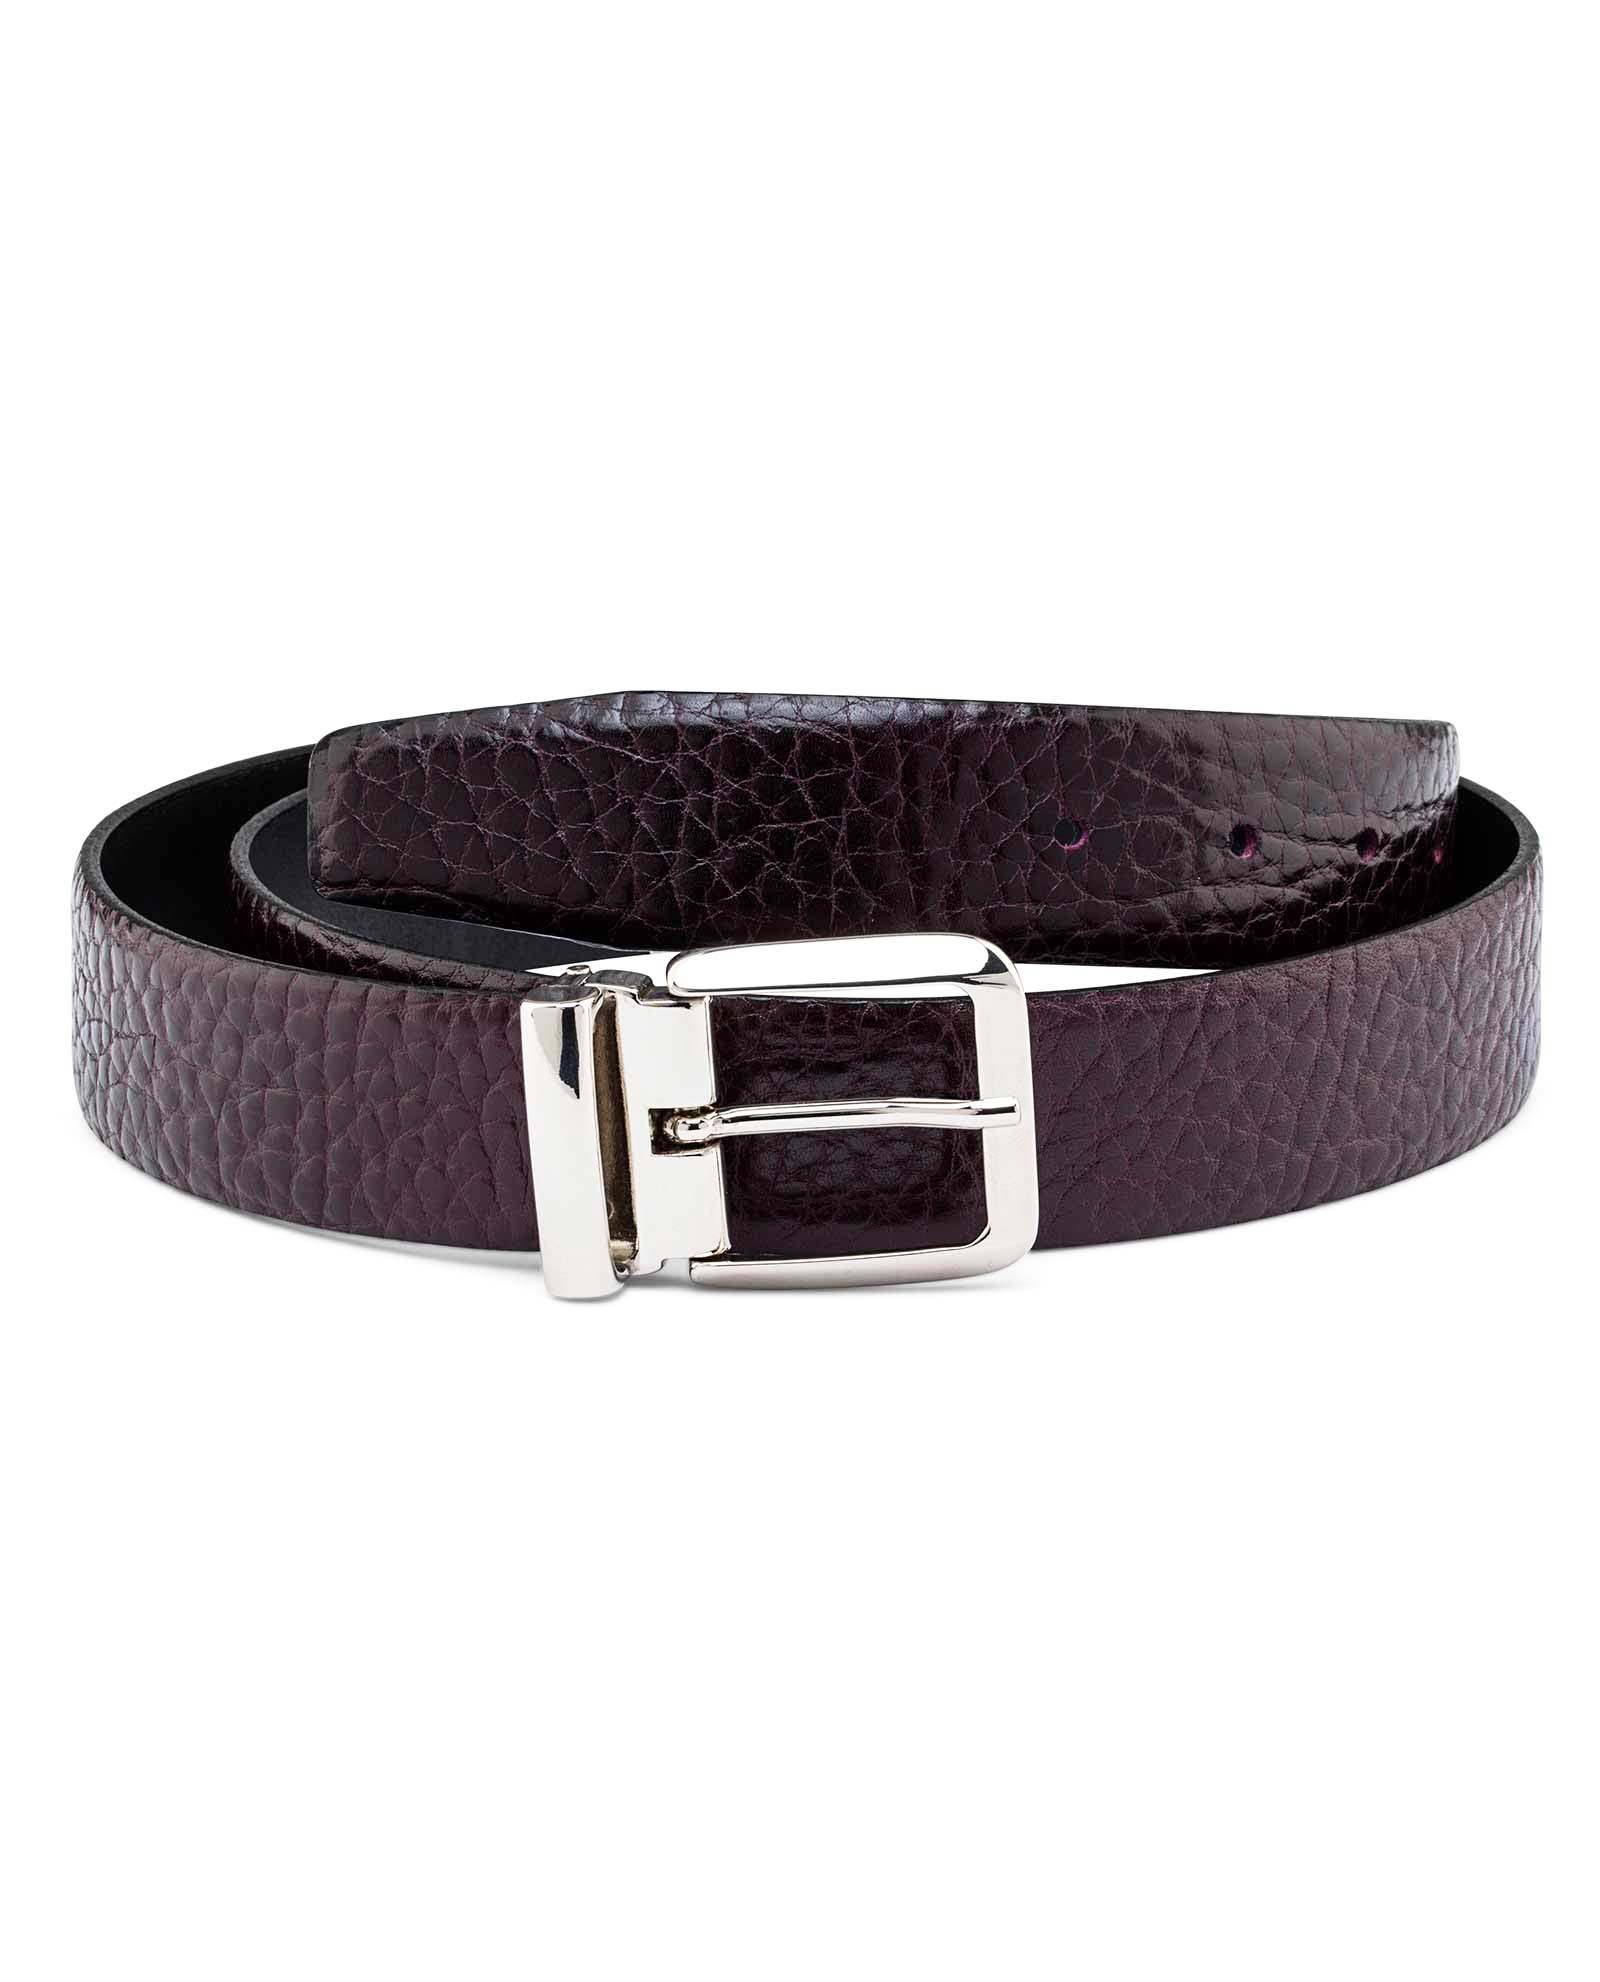 Buy Mens Cordovan Leather Belt | Capo Pelle | Free ship to United States